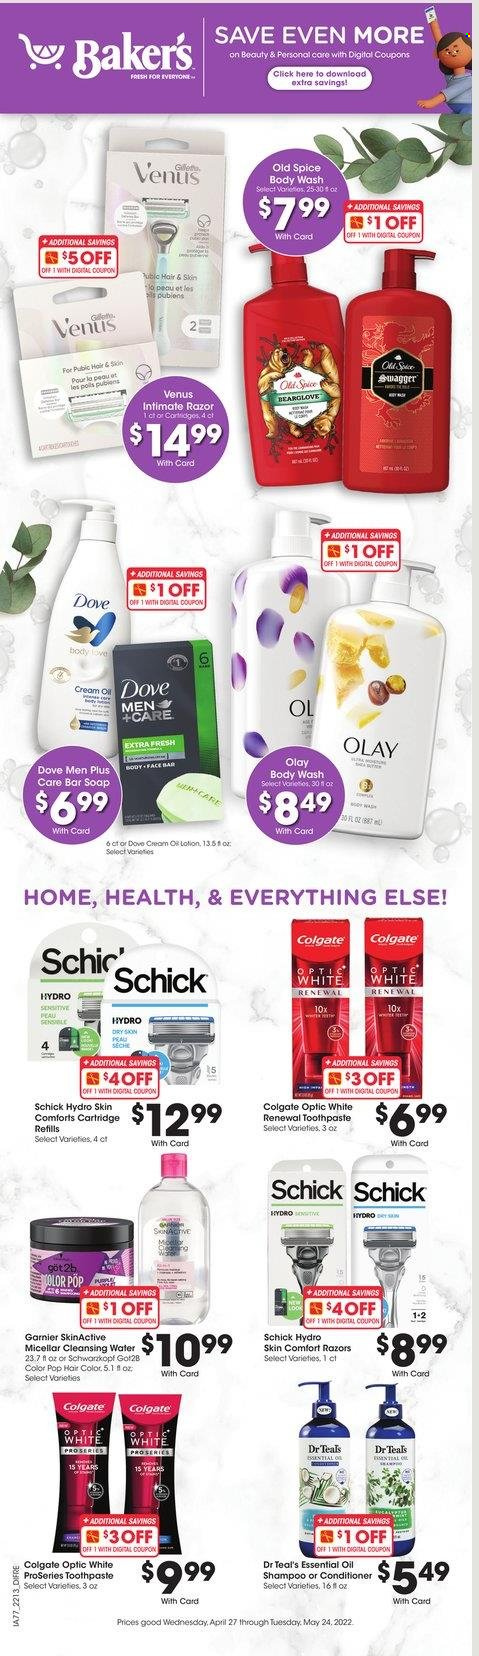 thumbnail - Baker's Flyer - 04/27/2022 - 05/24/2022 - Sales products - spice, Dove, body wash, shampoo, Old Spice, Schwarzkopf, soap bar, soap, Colgate, toothpaste, Garnier, Olay, conditioner, hair color, body lotion, razor, Schick, Venus, Bakers, cartridge. Page 1.